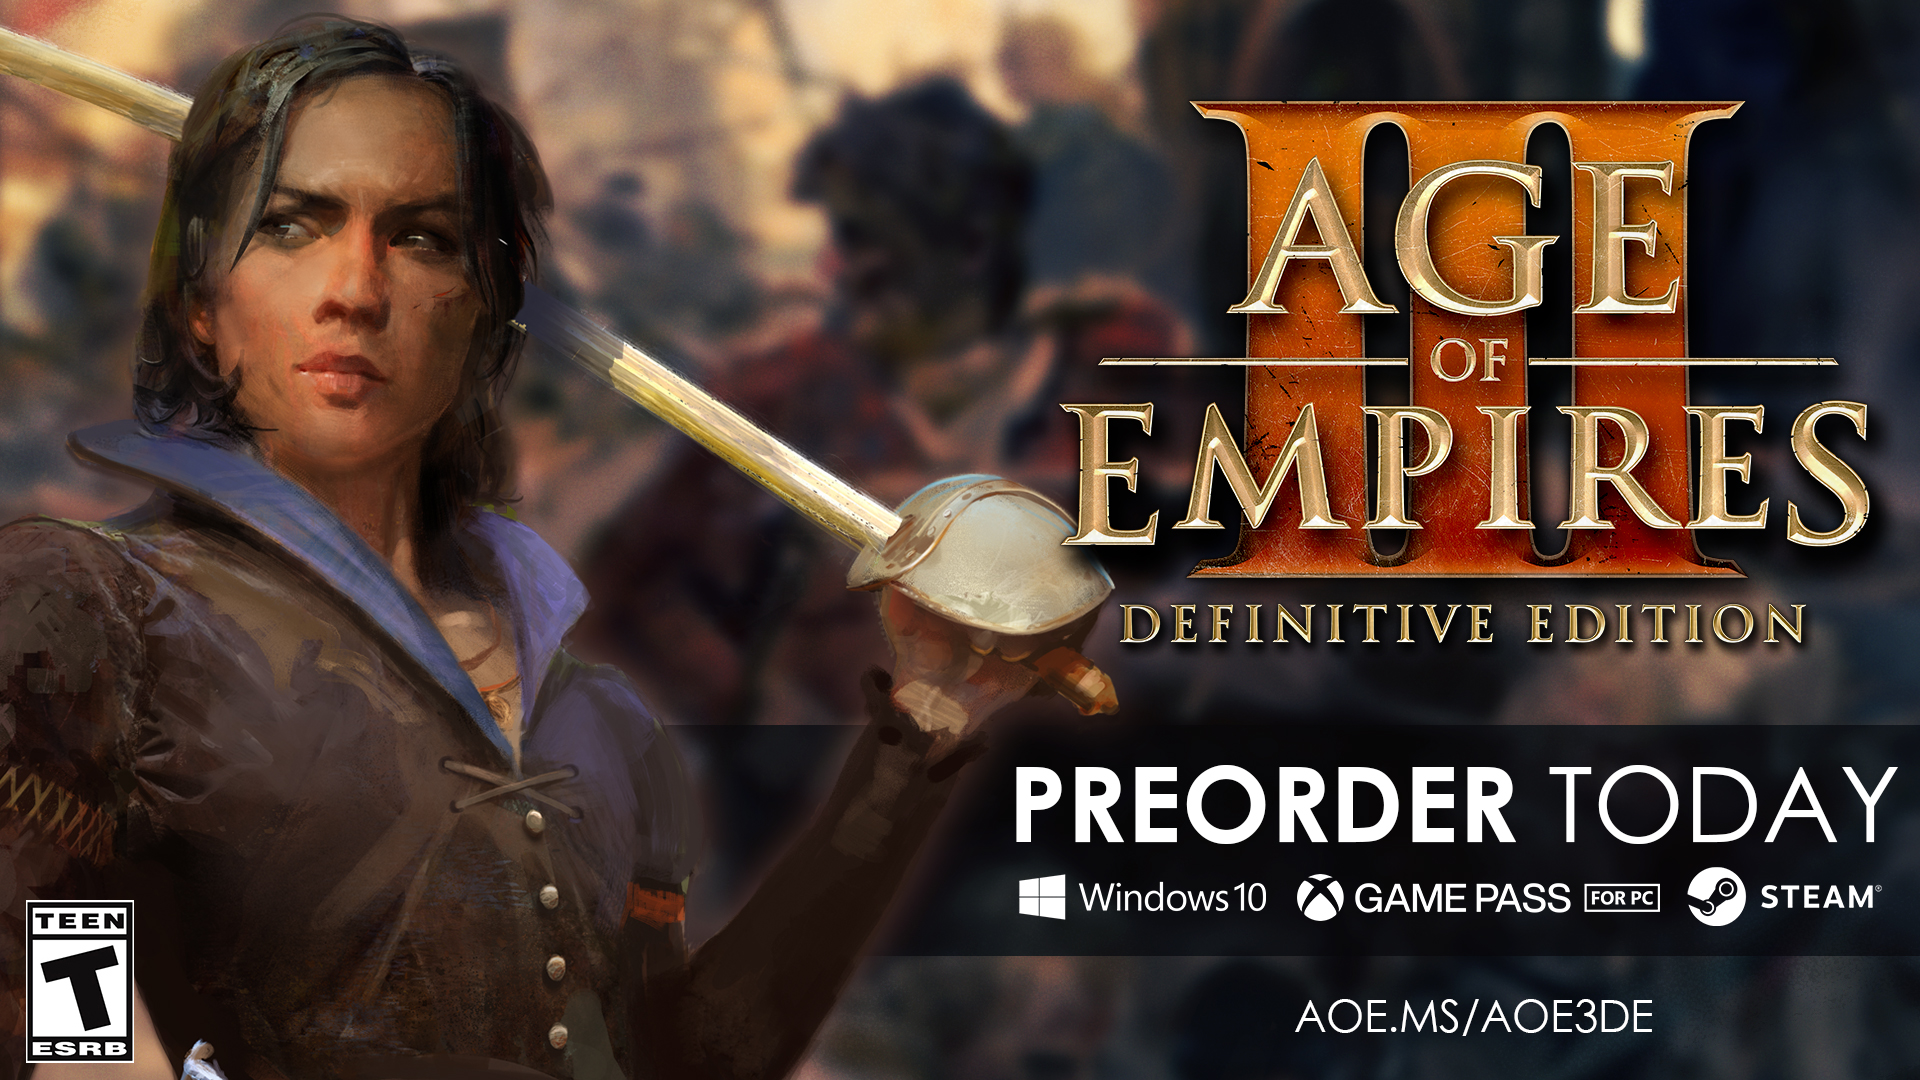 how to install age of empires 3 on windows 10